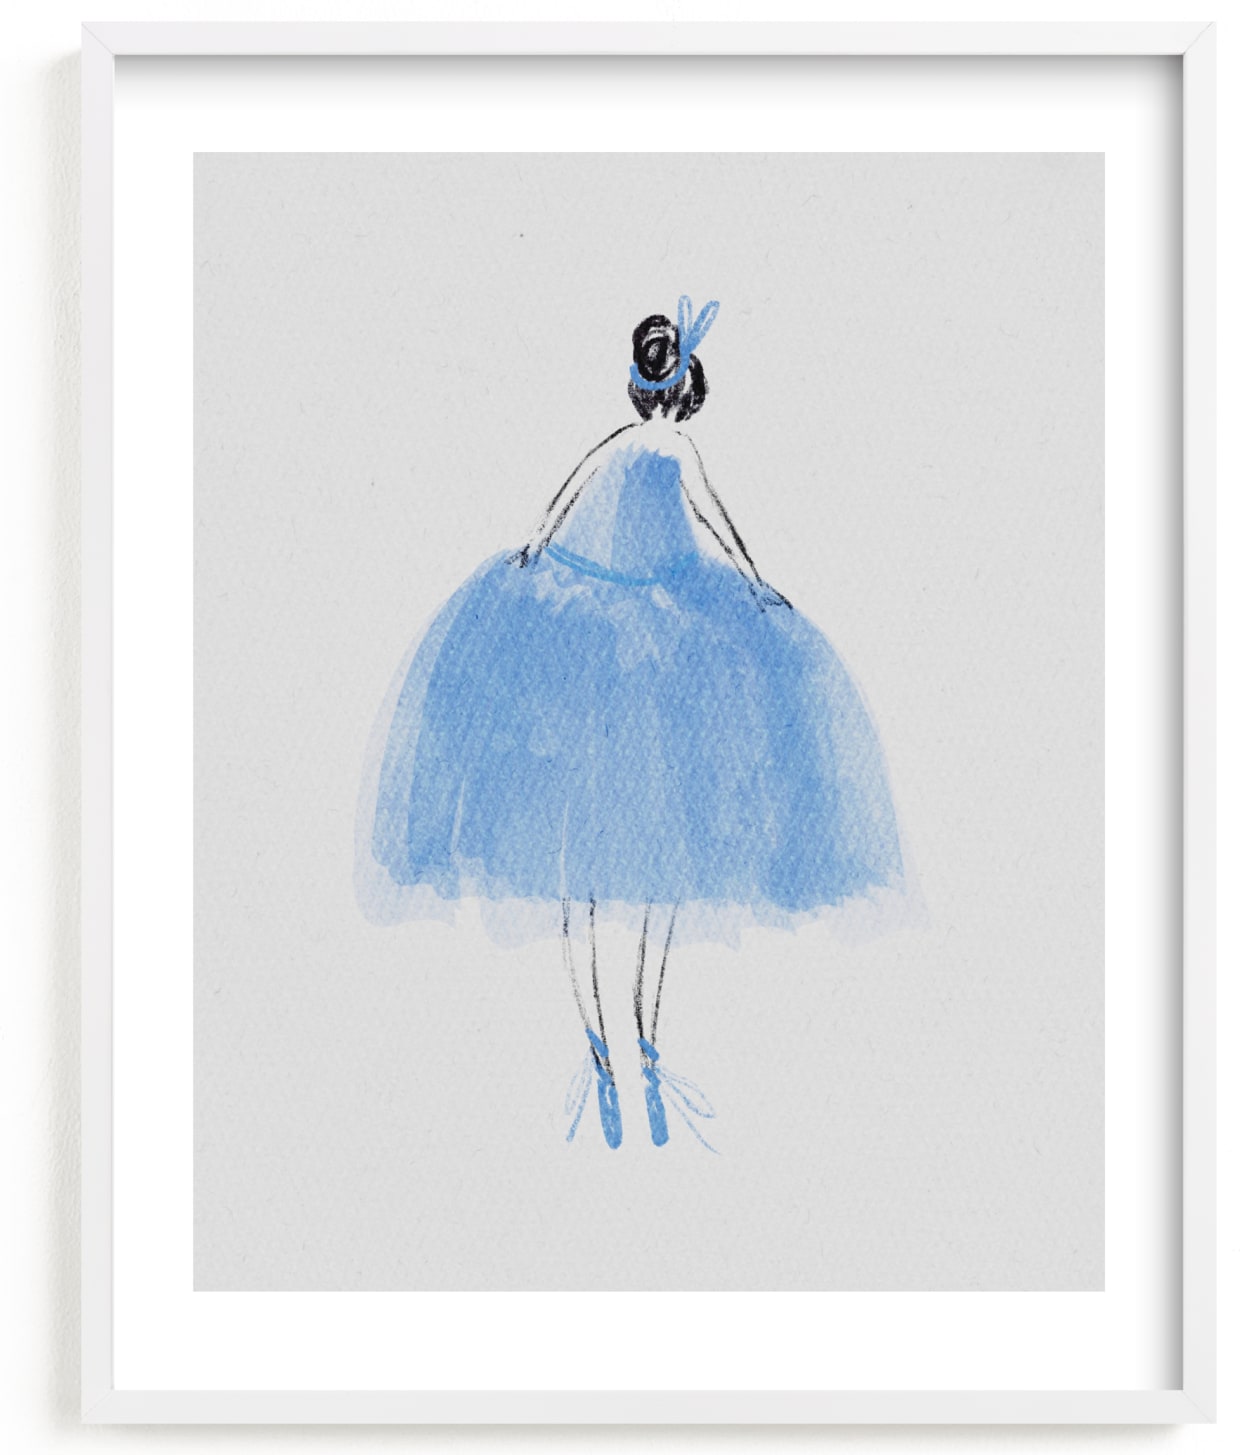 This is a blue kids wall art by Grae called Painted Ballerina.